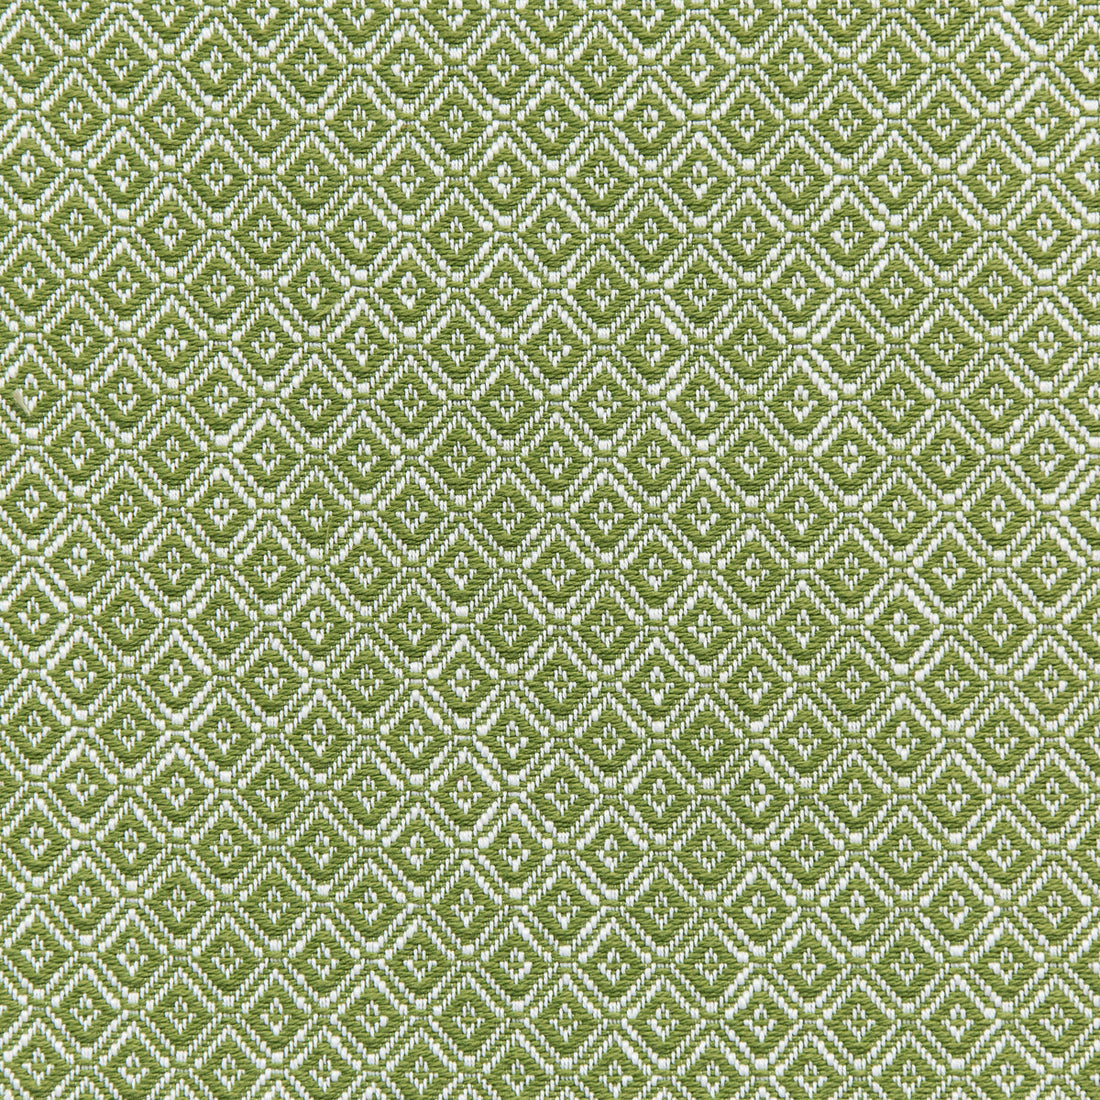 Seaford Weave fabric in leaf color - pattern 2020106.23.0 - by Lee Jofa in the Linford Weaves collection